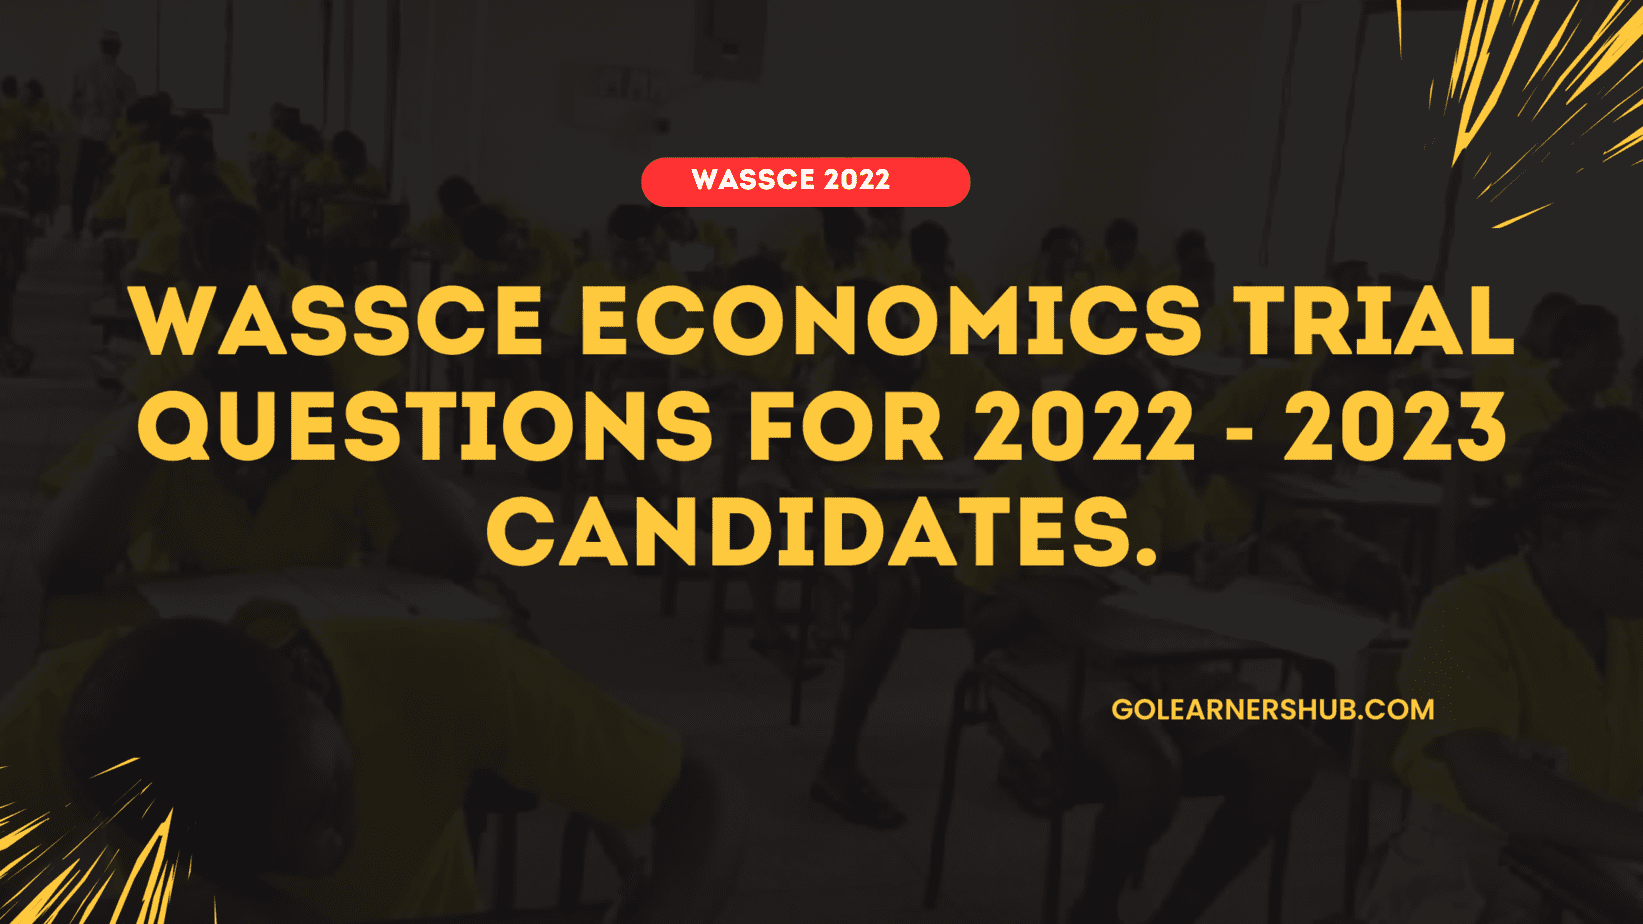 WASSCE Economics Trial Questions For 2022 - 2023 Candidates